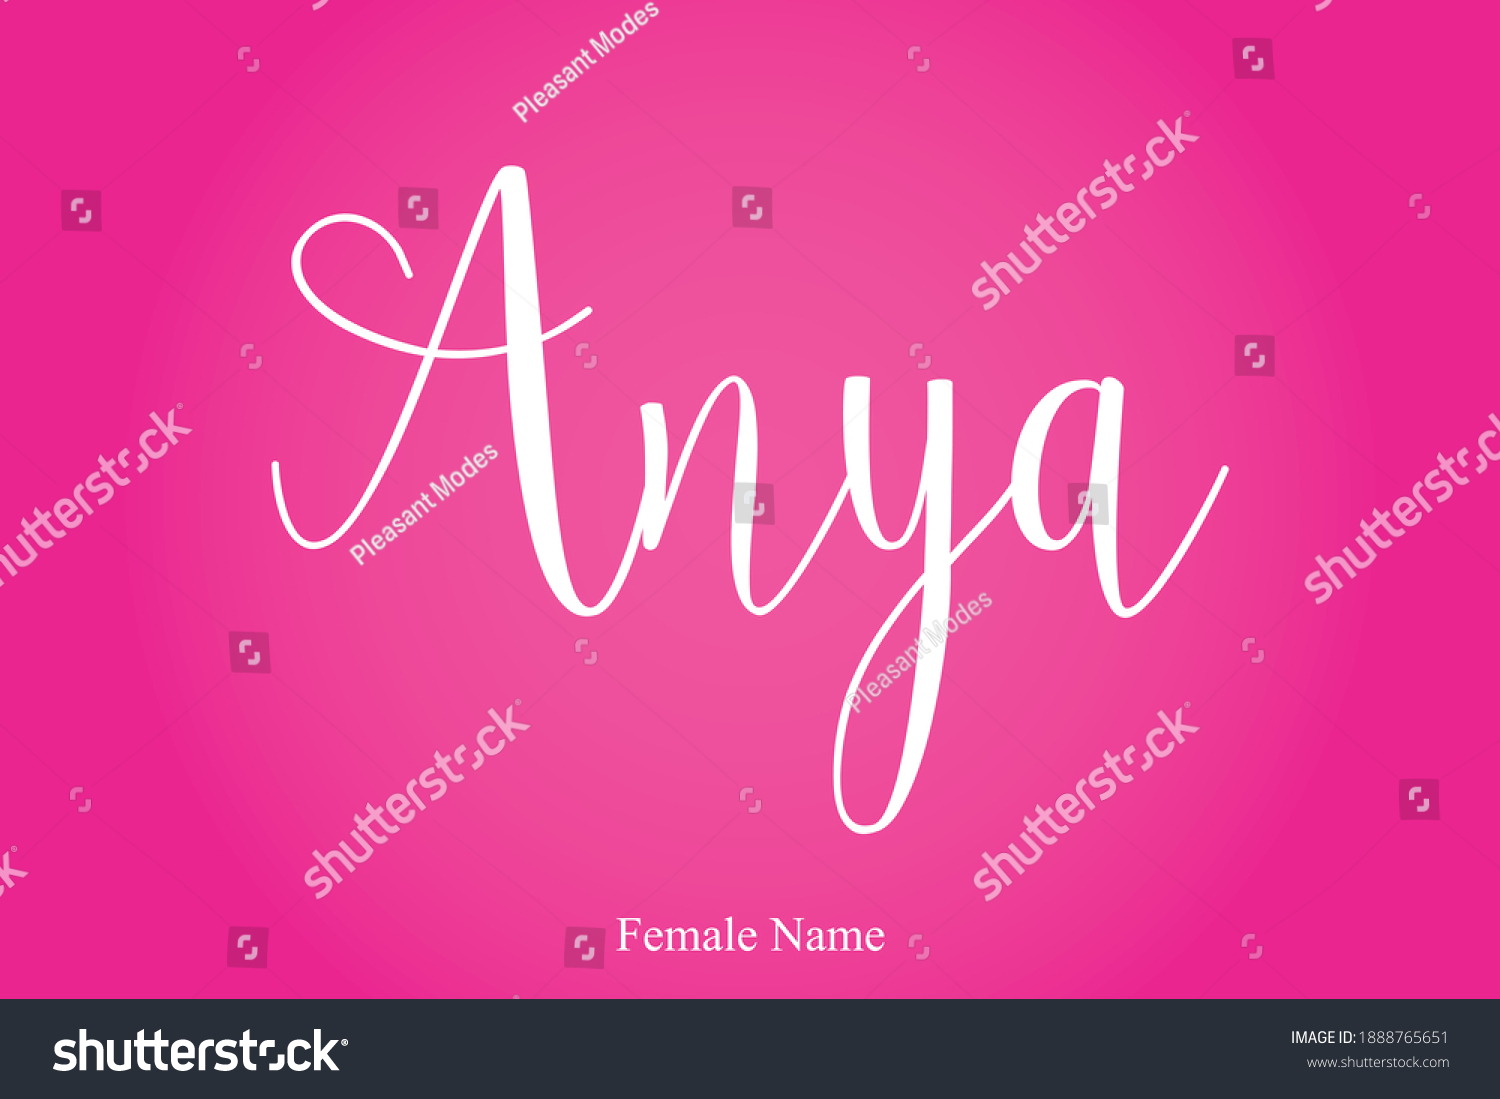 SVG of Anya-Female Name Calligraphy White Color Text On Pink Gradient Background  svg